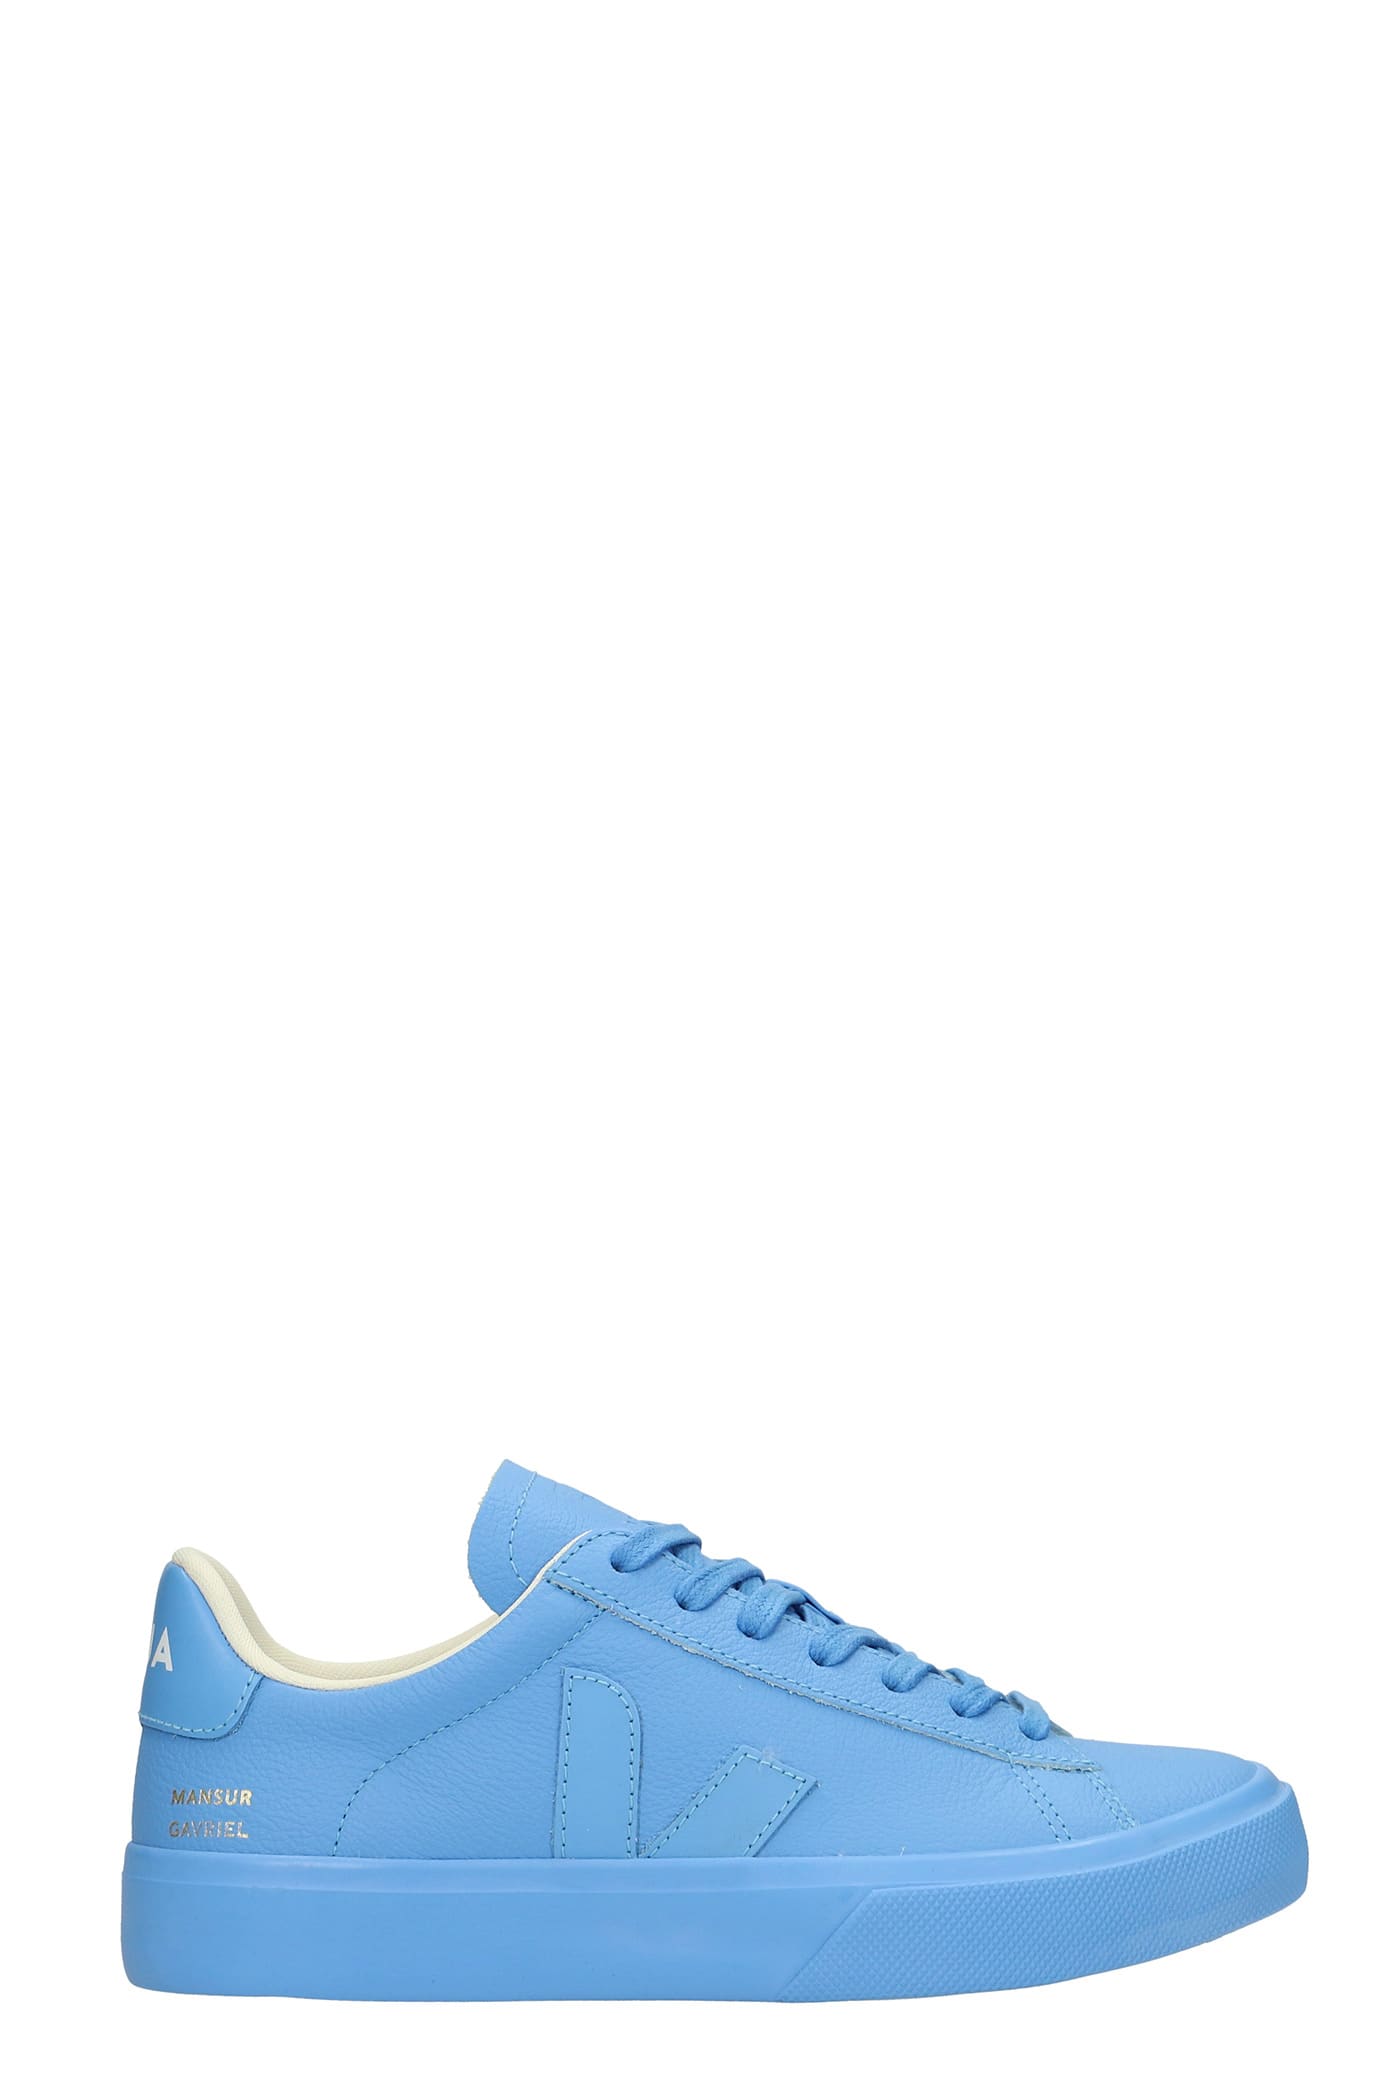 Veja Campo Sneakers In Cyan Leather